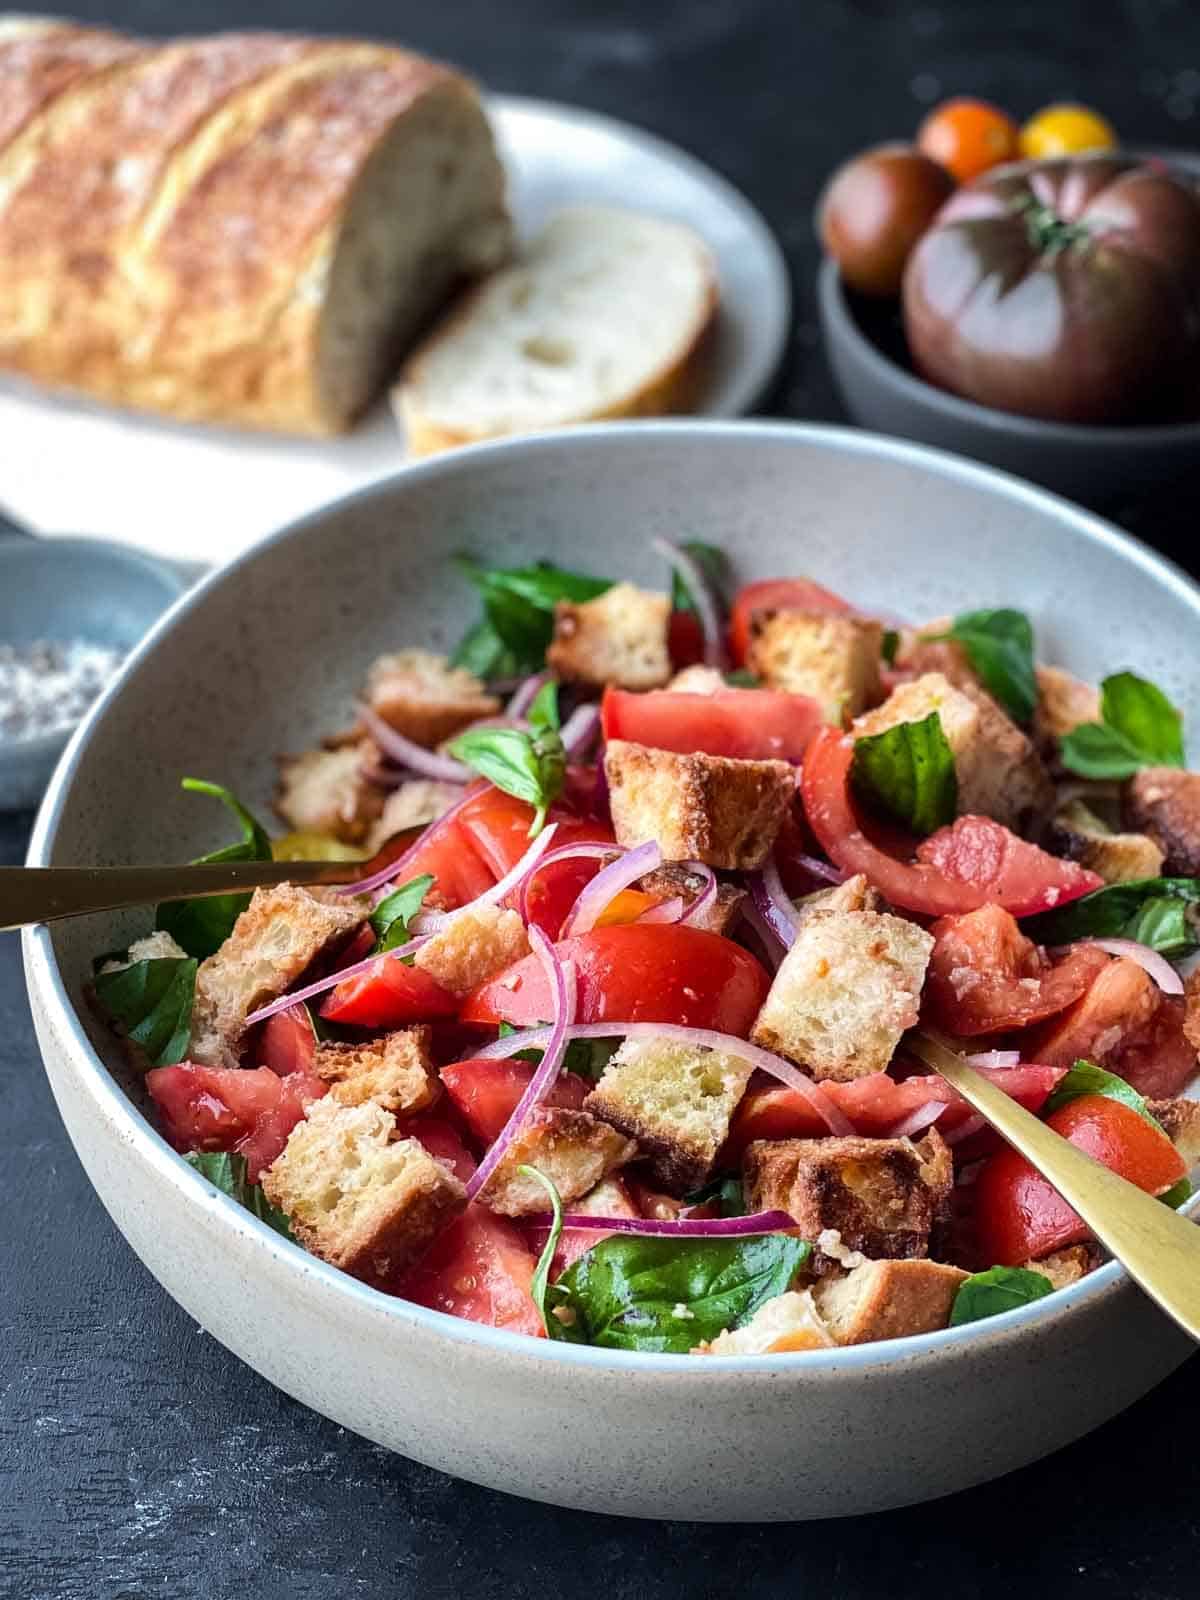 Panzanella salad in a white salad bowl with gold cutlery with sliced bread loaf in the background